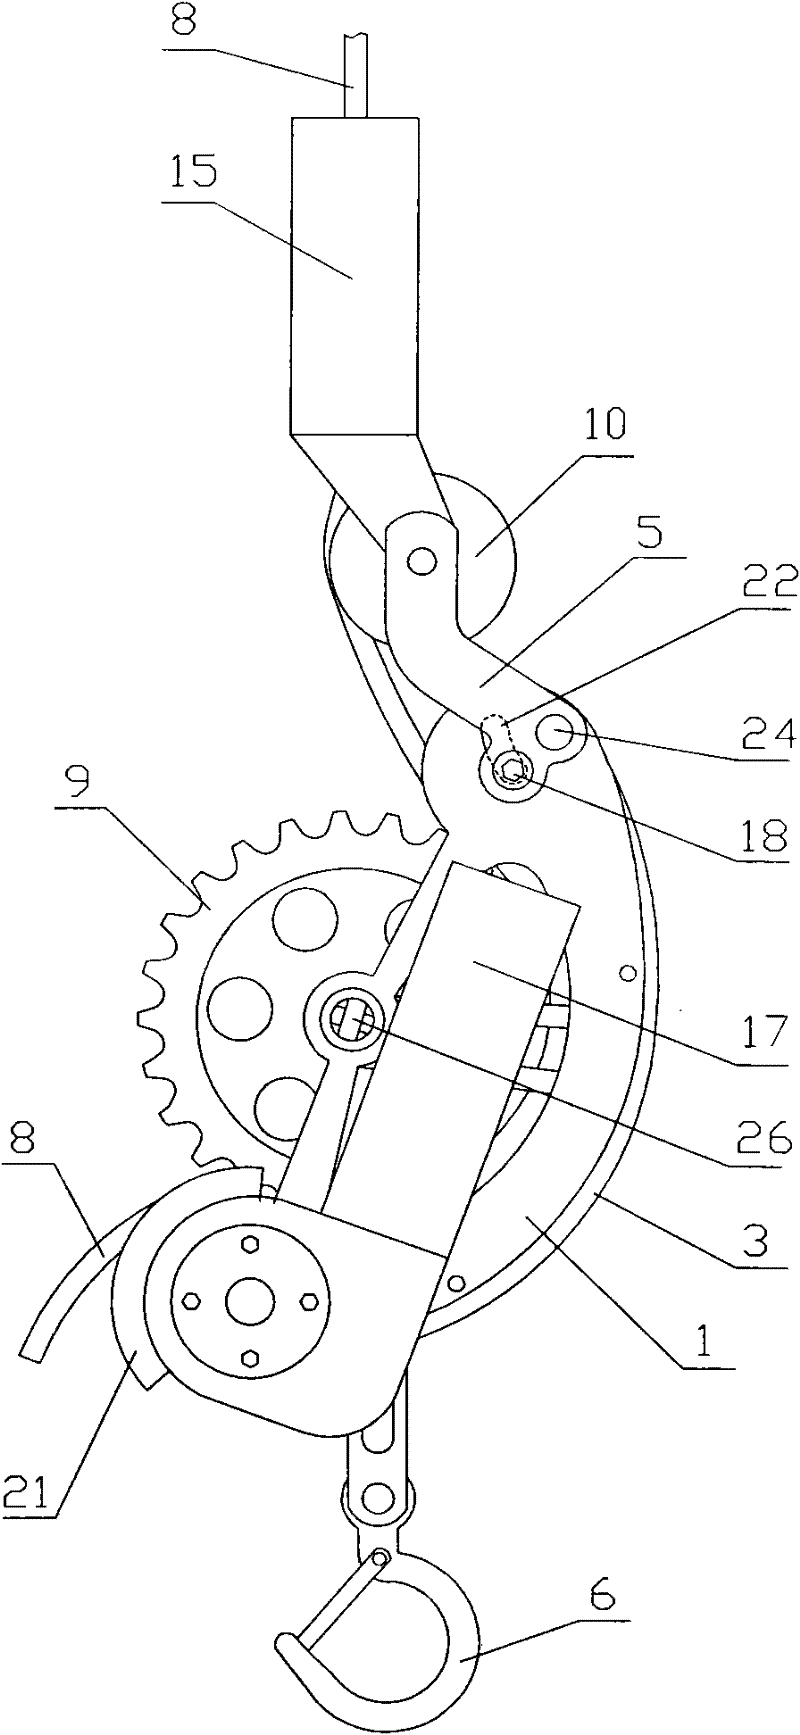 Self-lifting load carrying device